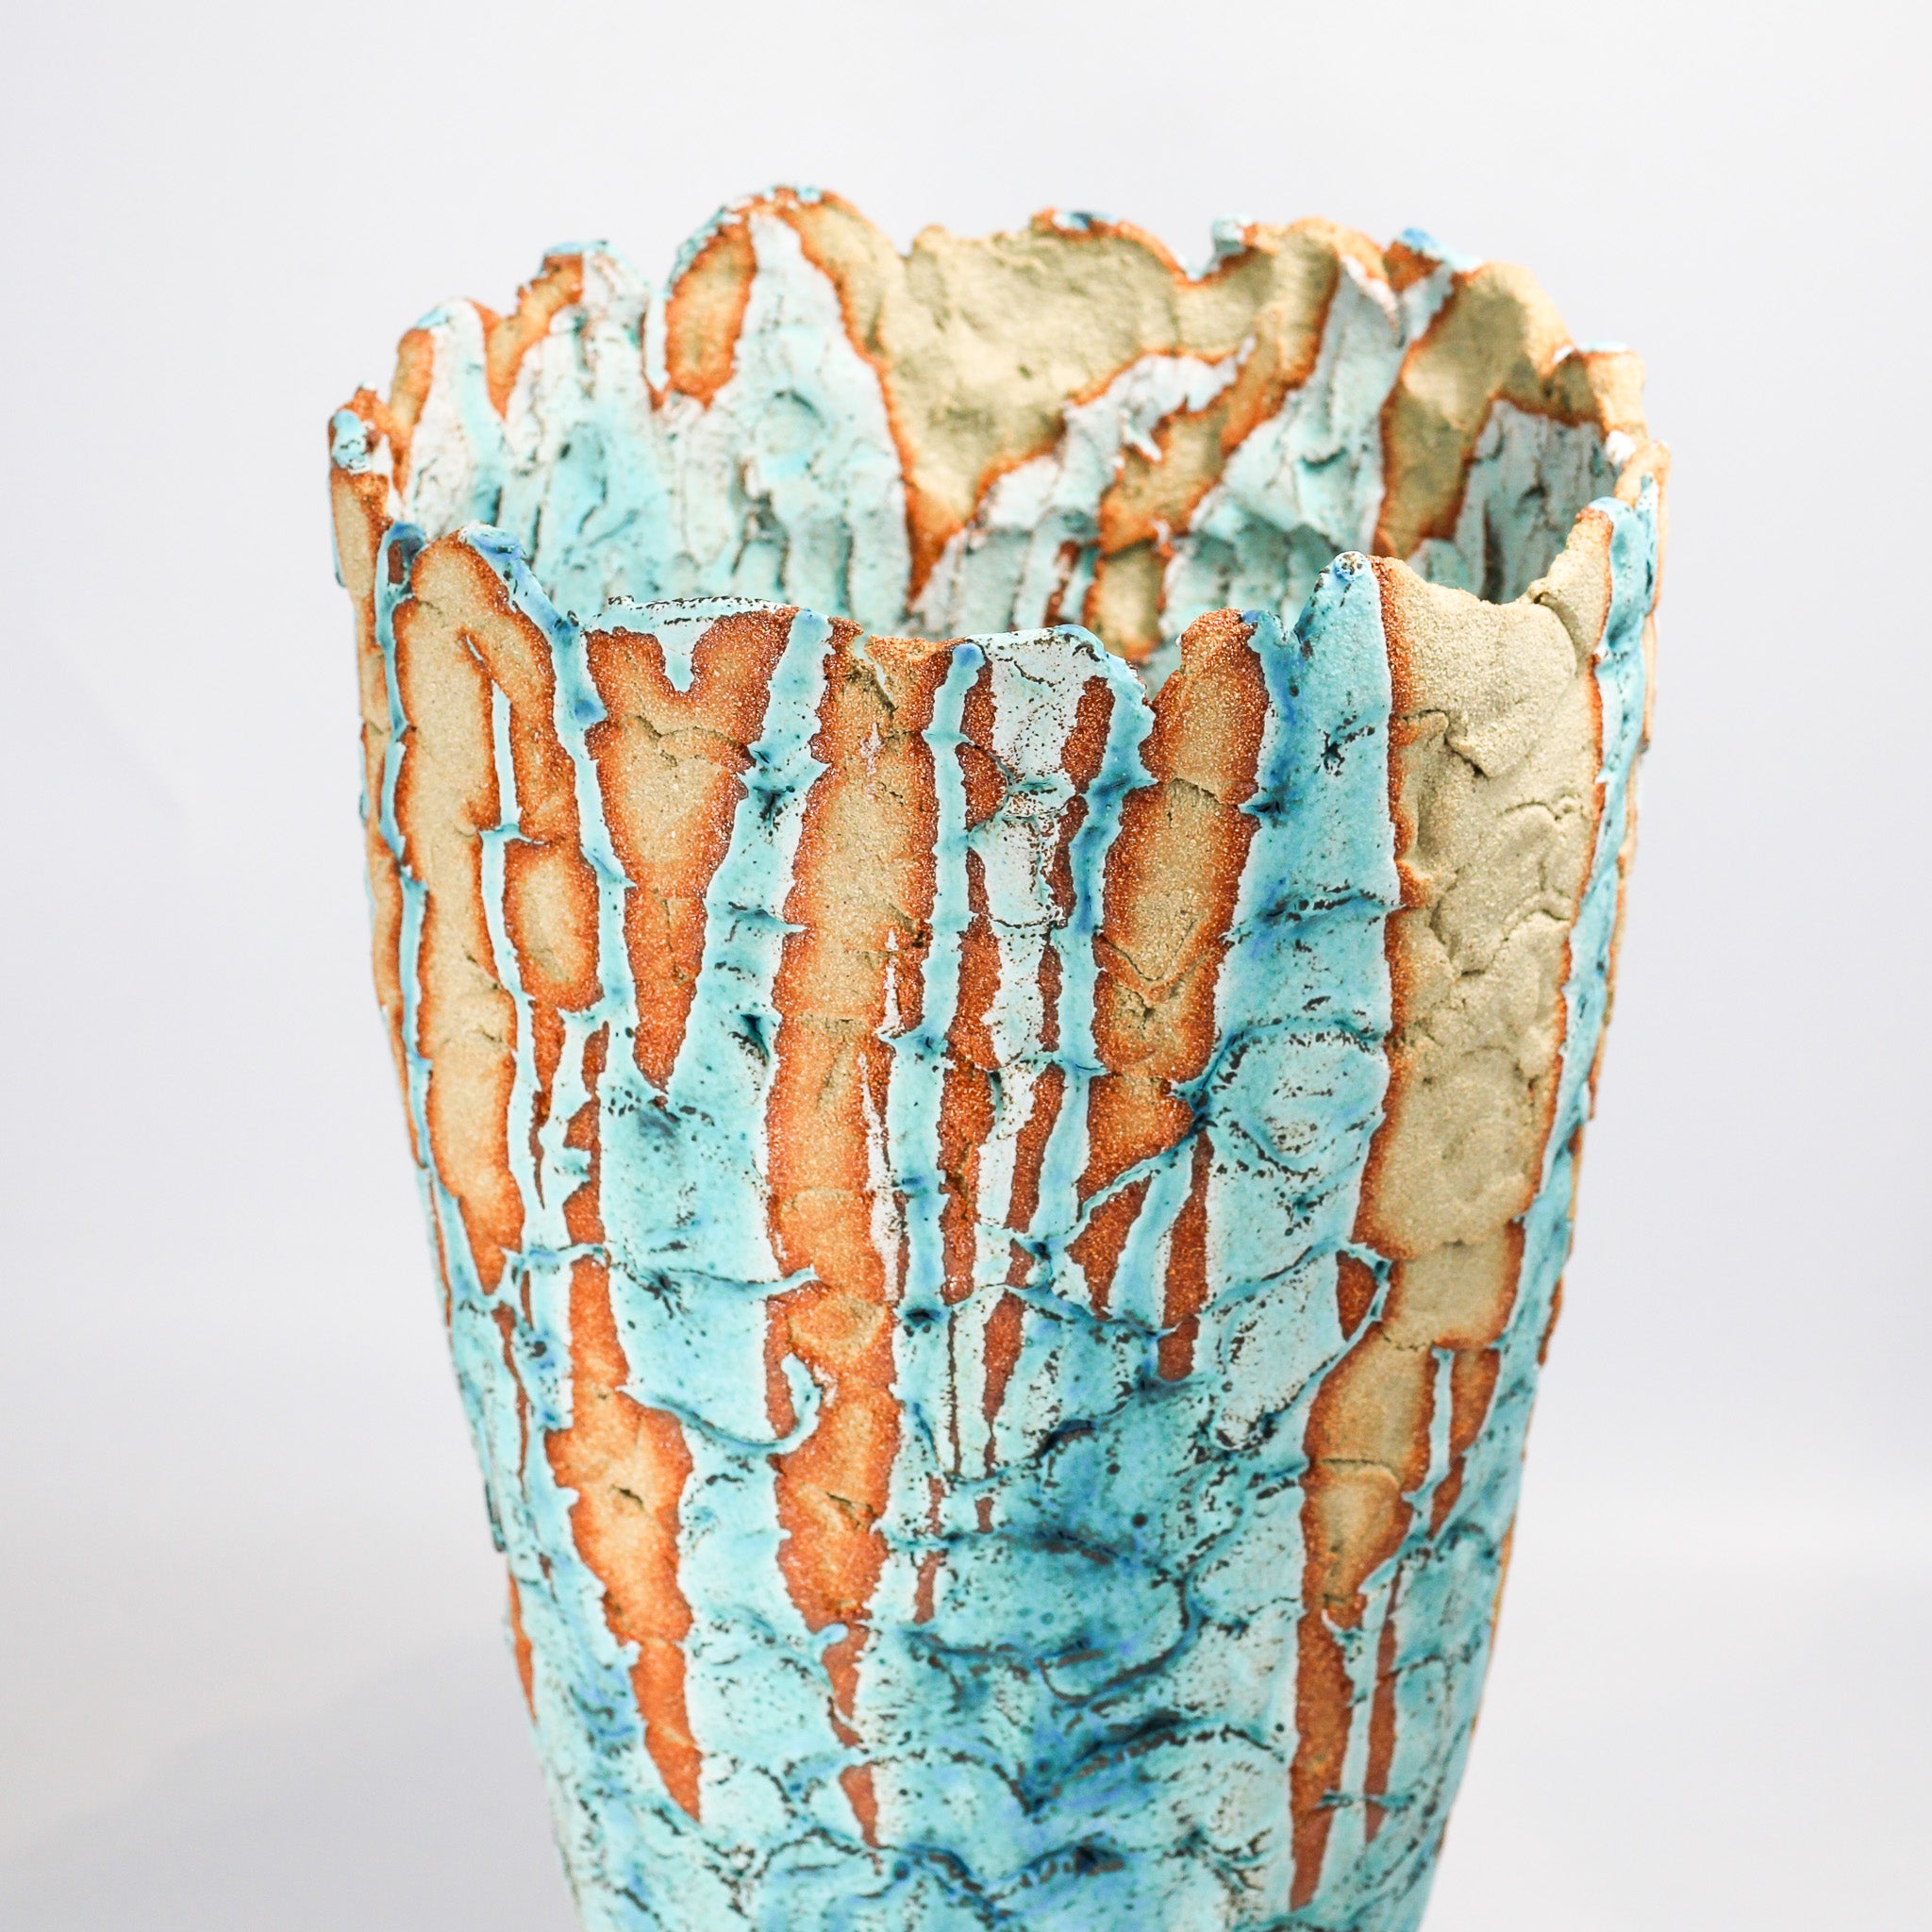 Flared Planter with Dry Blue Glaze